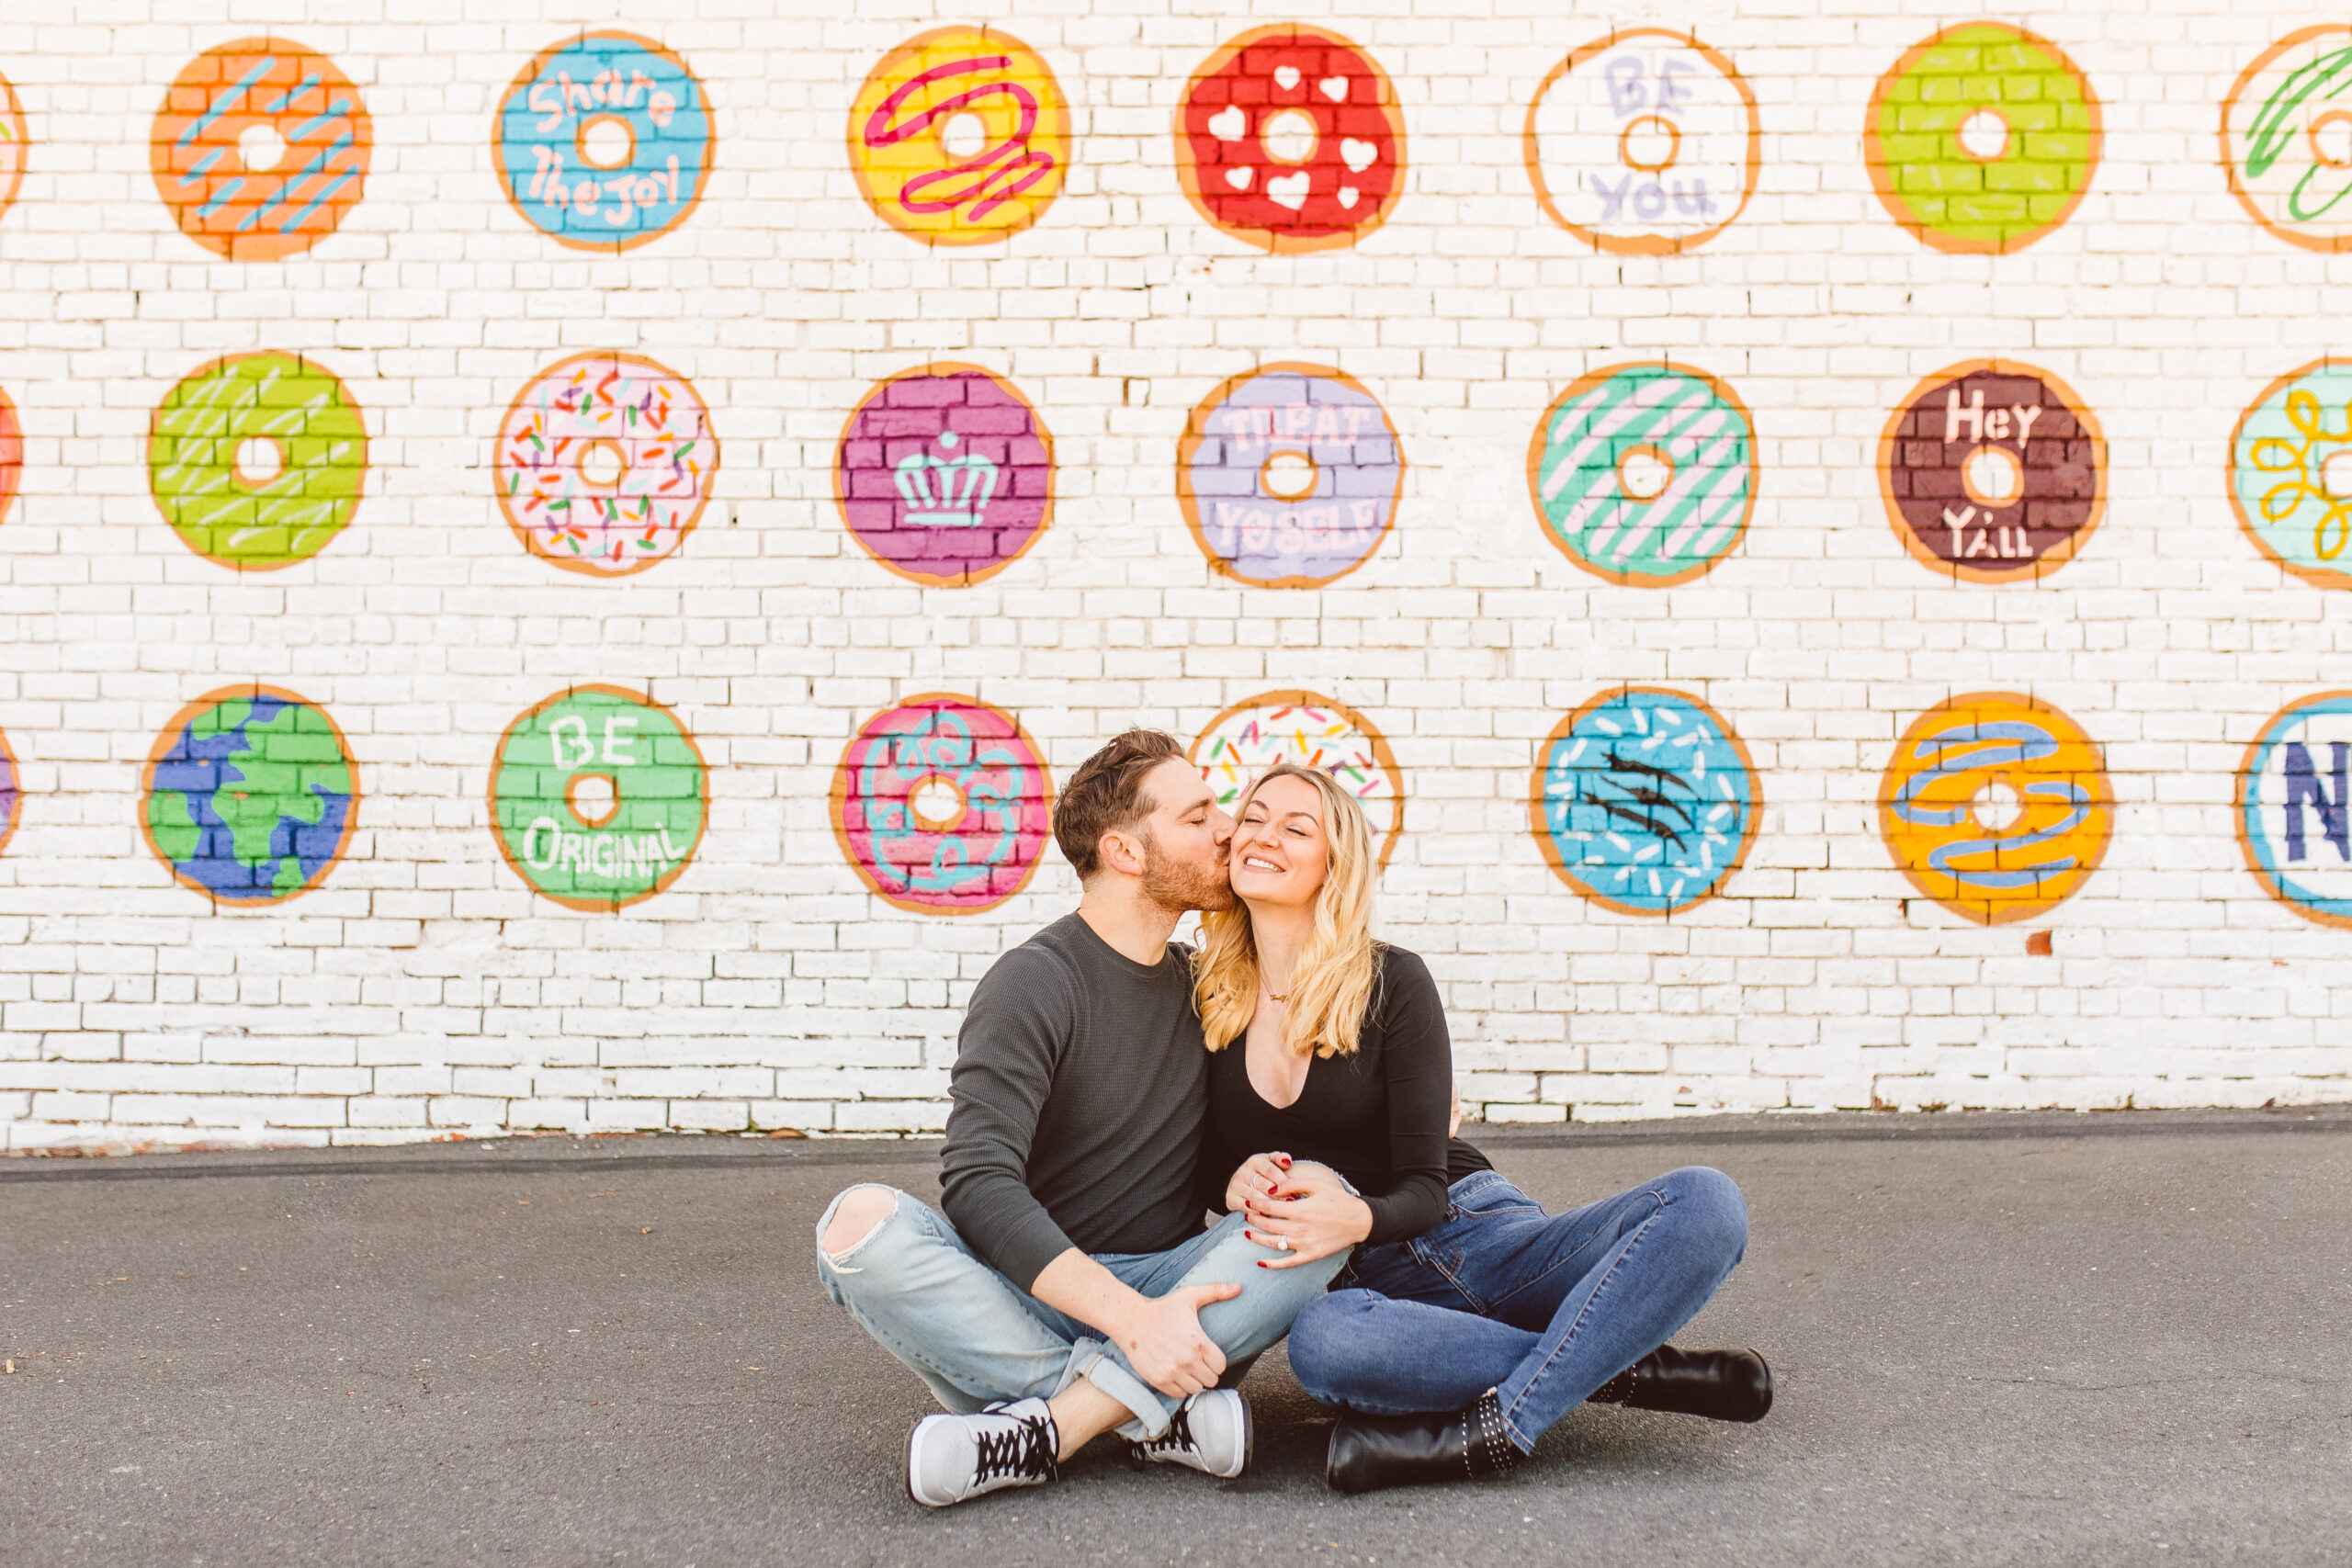 Dre Charlotte Influencer posing in front of Donut Wall 6. Donut Wall by Gina Elizabeth Franco at 2116 Hawkins St